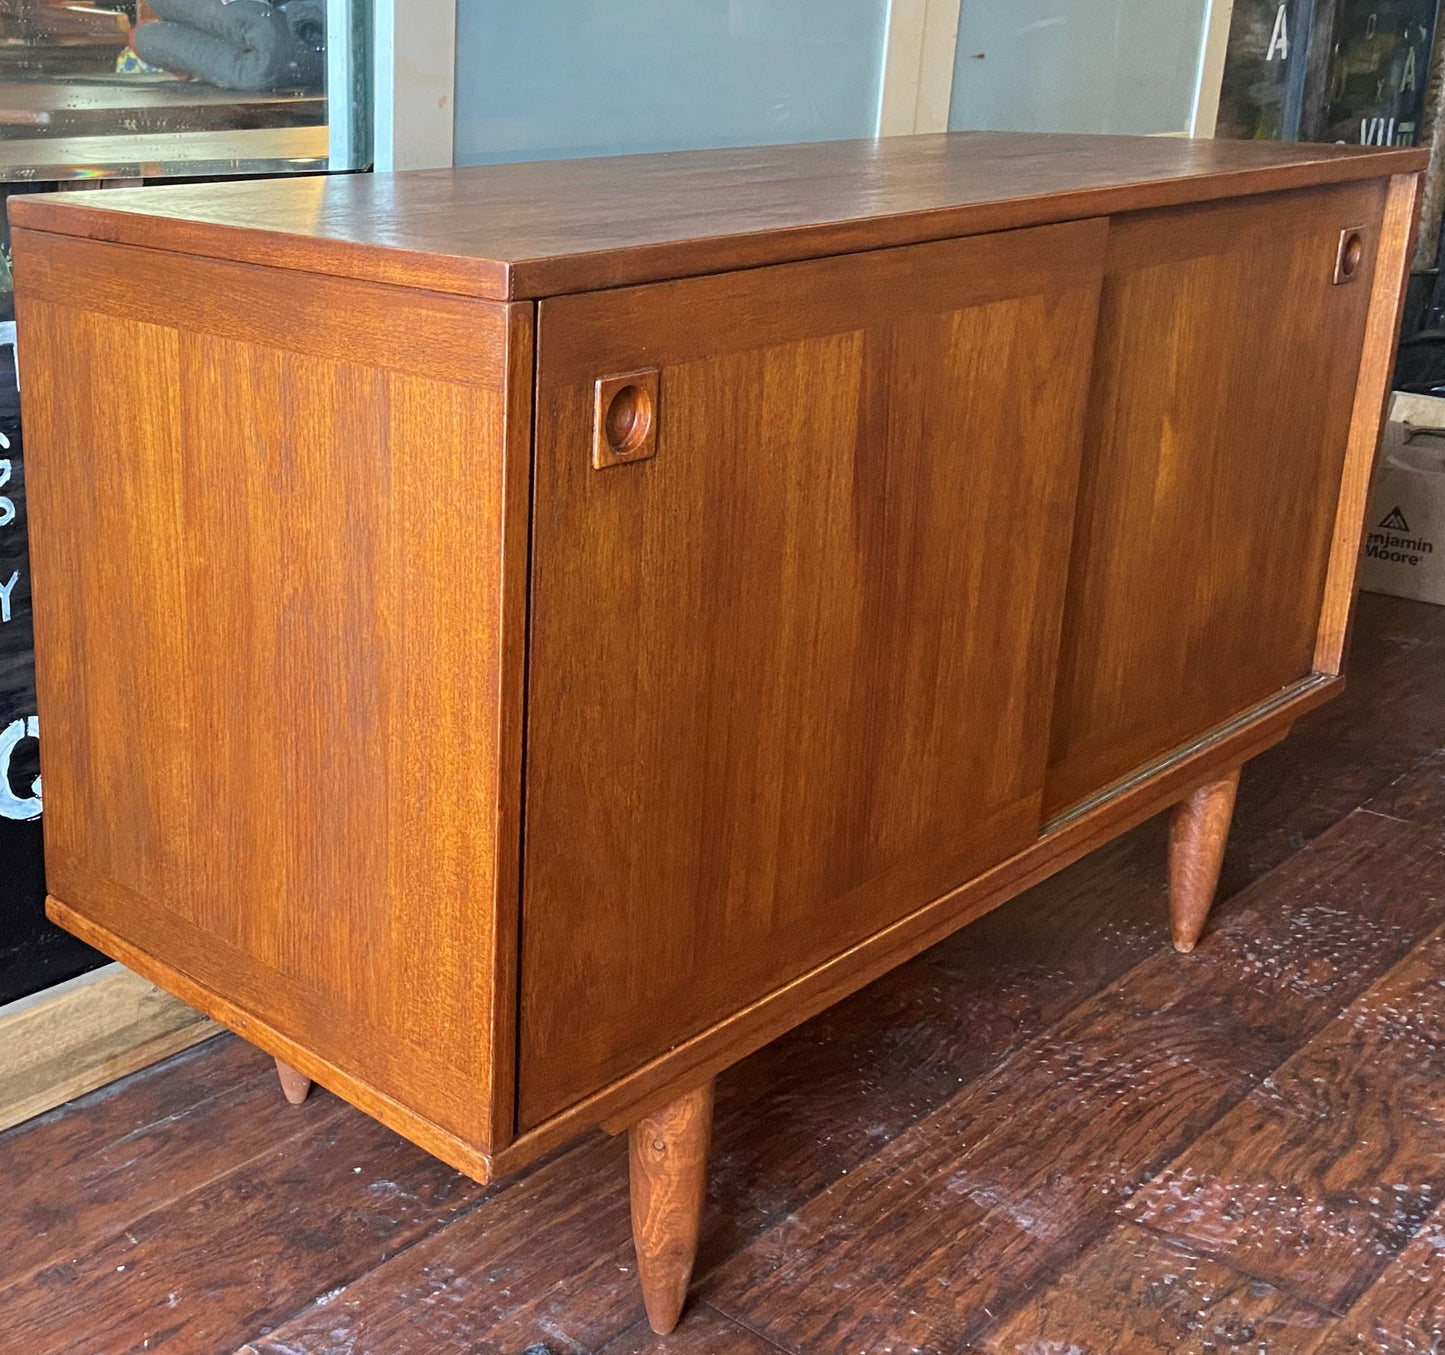 REFINISHED Swedish MCM Teak Sideboard with Finished Back, Compact 47", Perfect